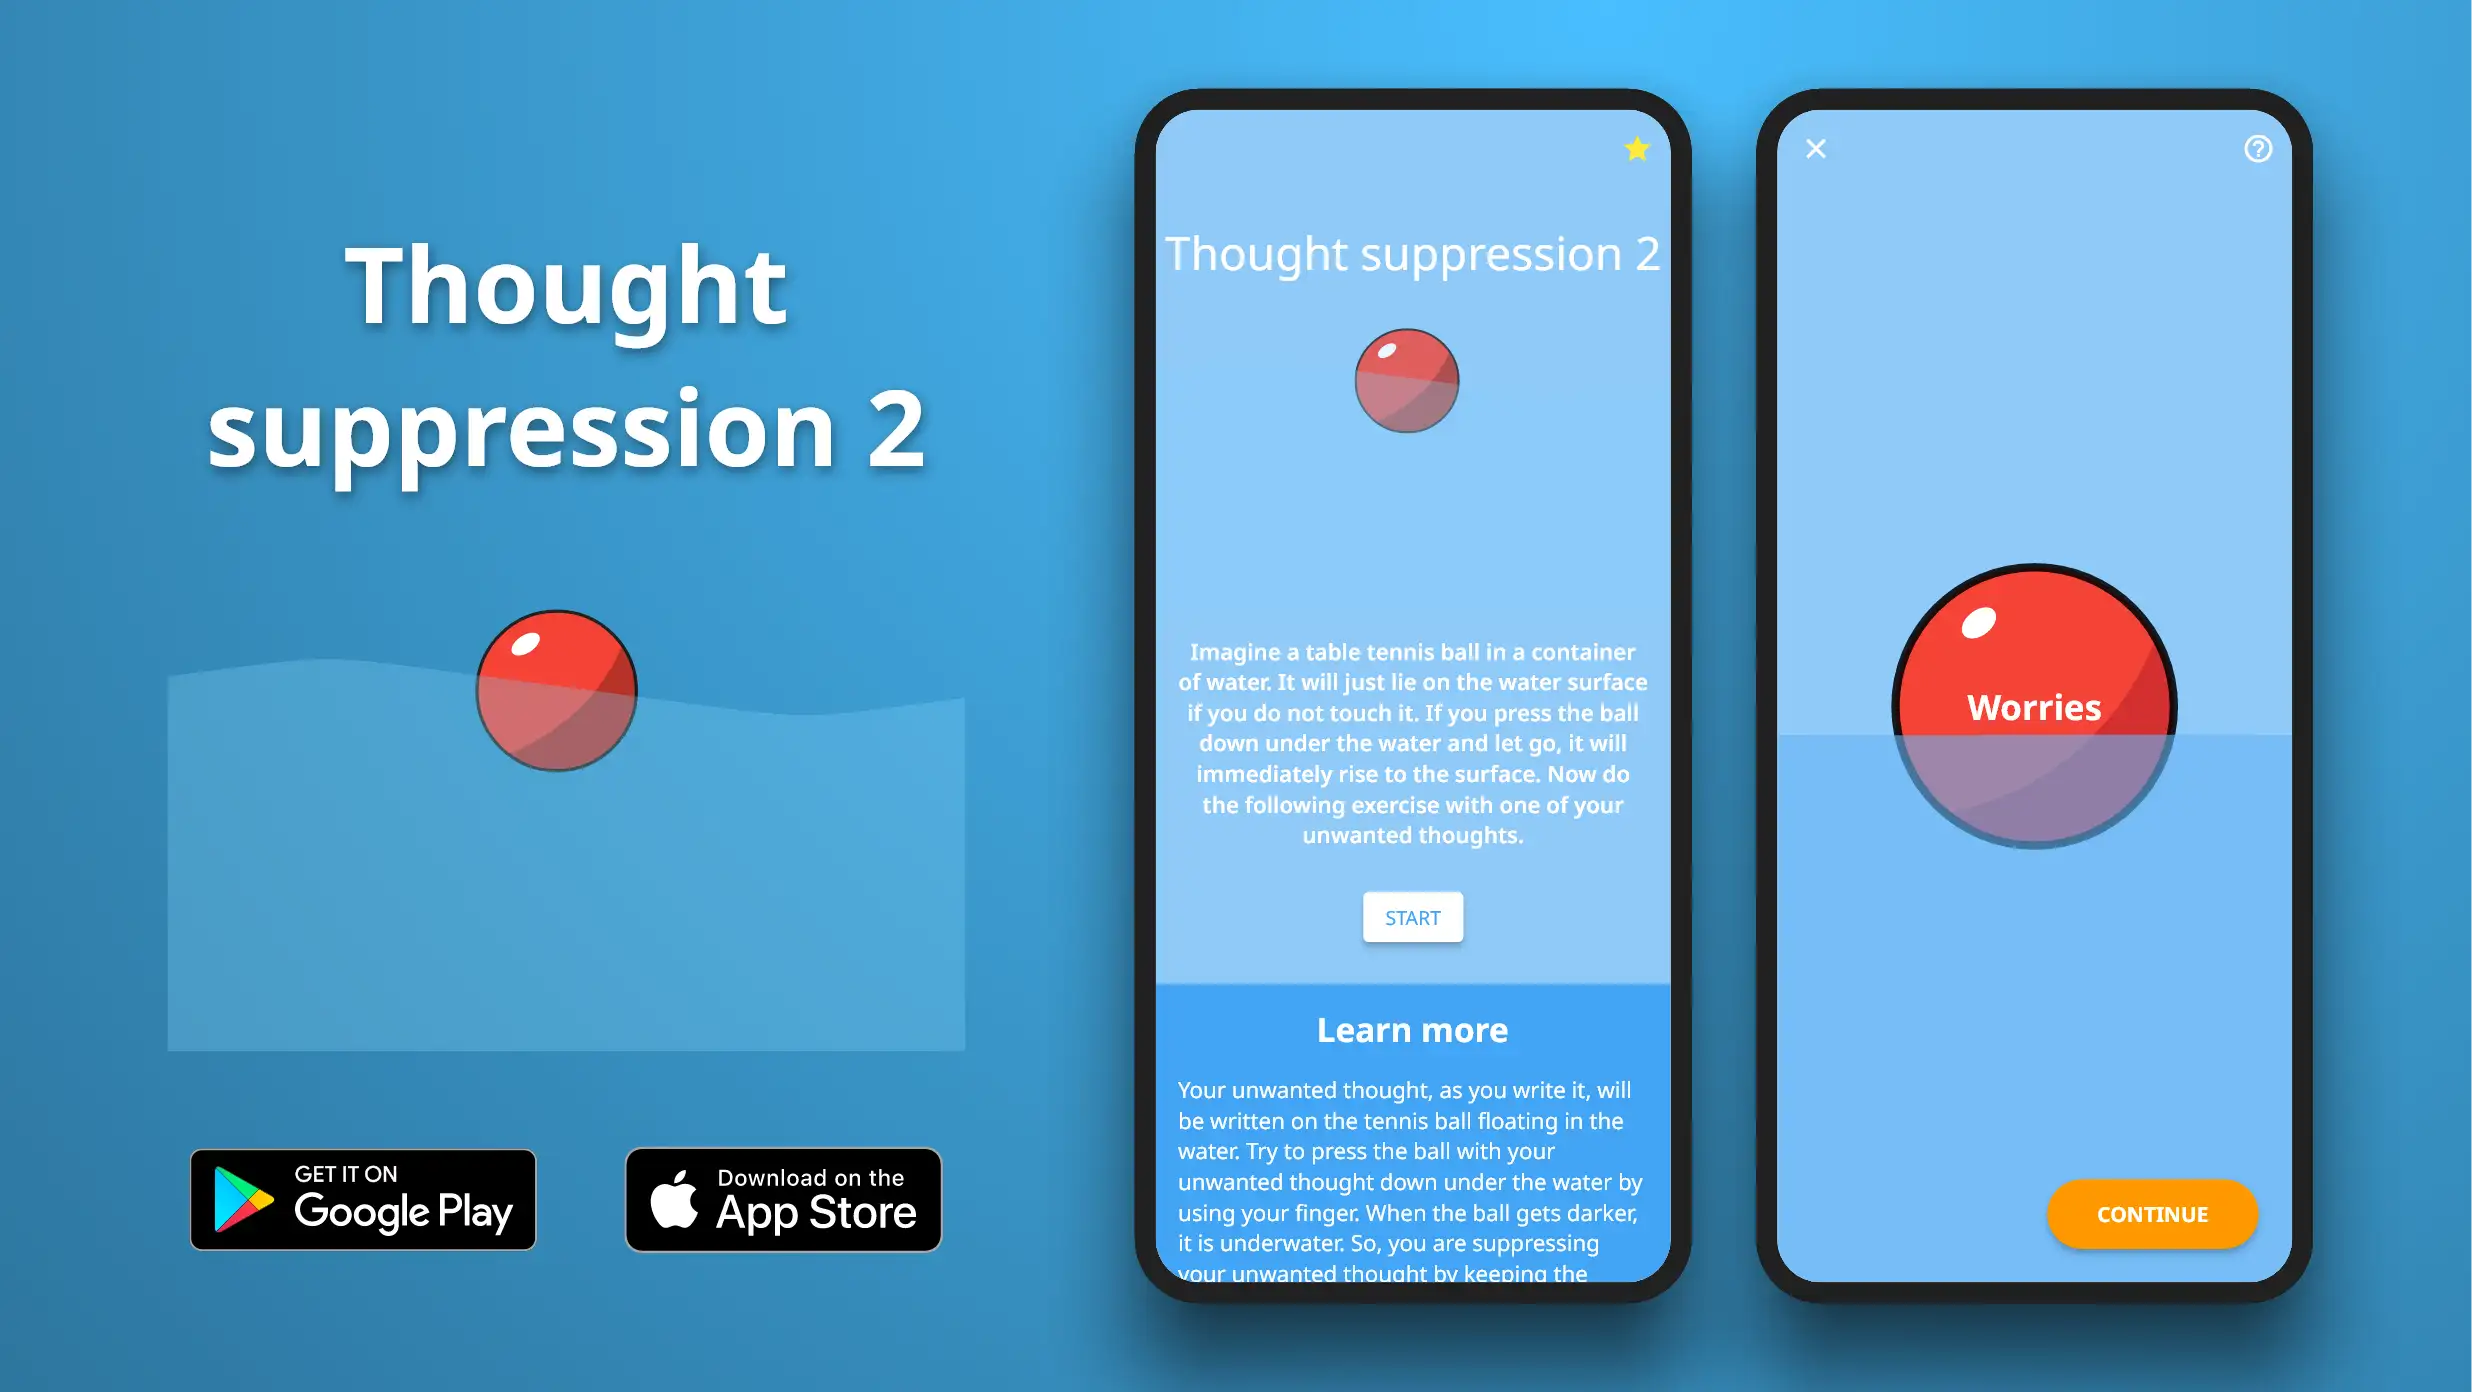 Thought suppression 2 exercise in the Meta Learn app.